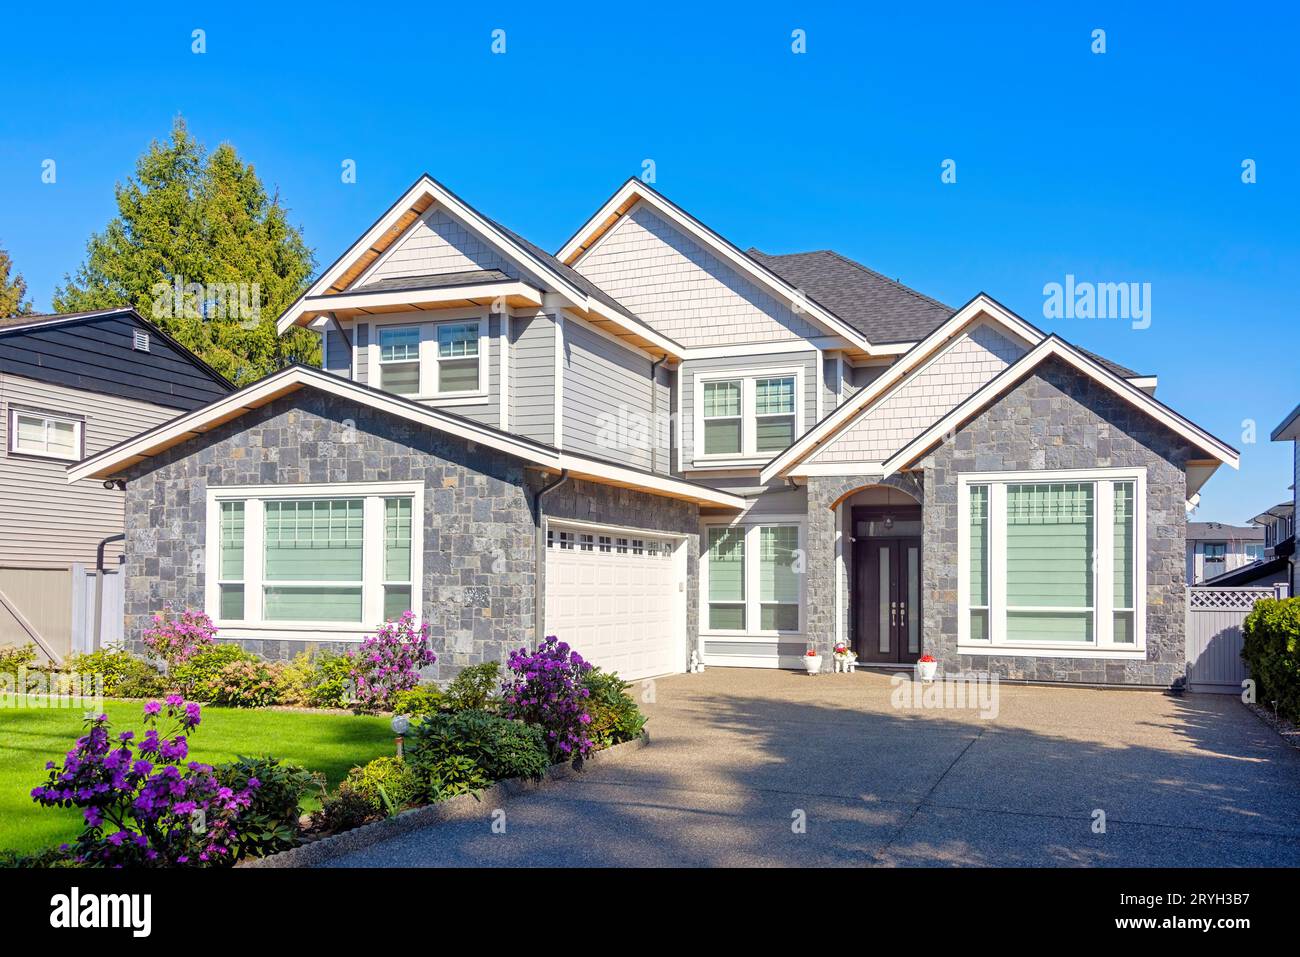 A perfect neighbourhood. Brand new luxury family house on bright winter day Stock Photo